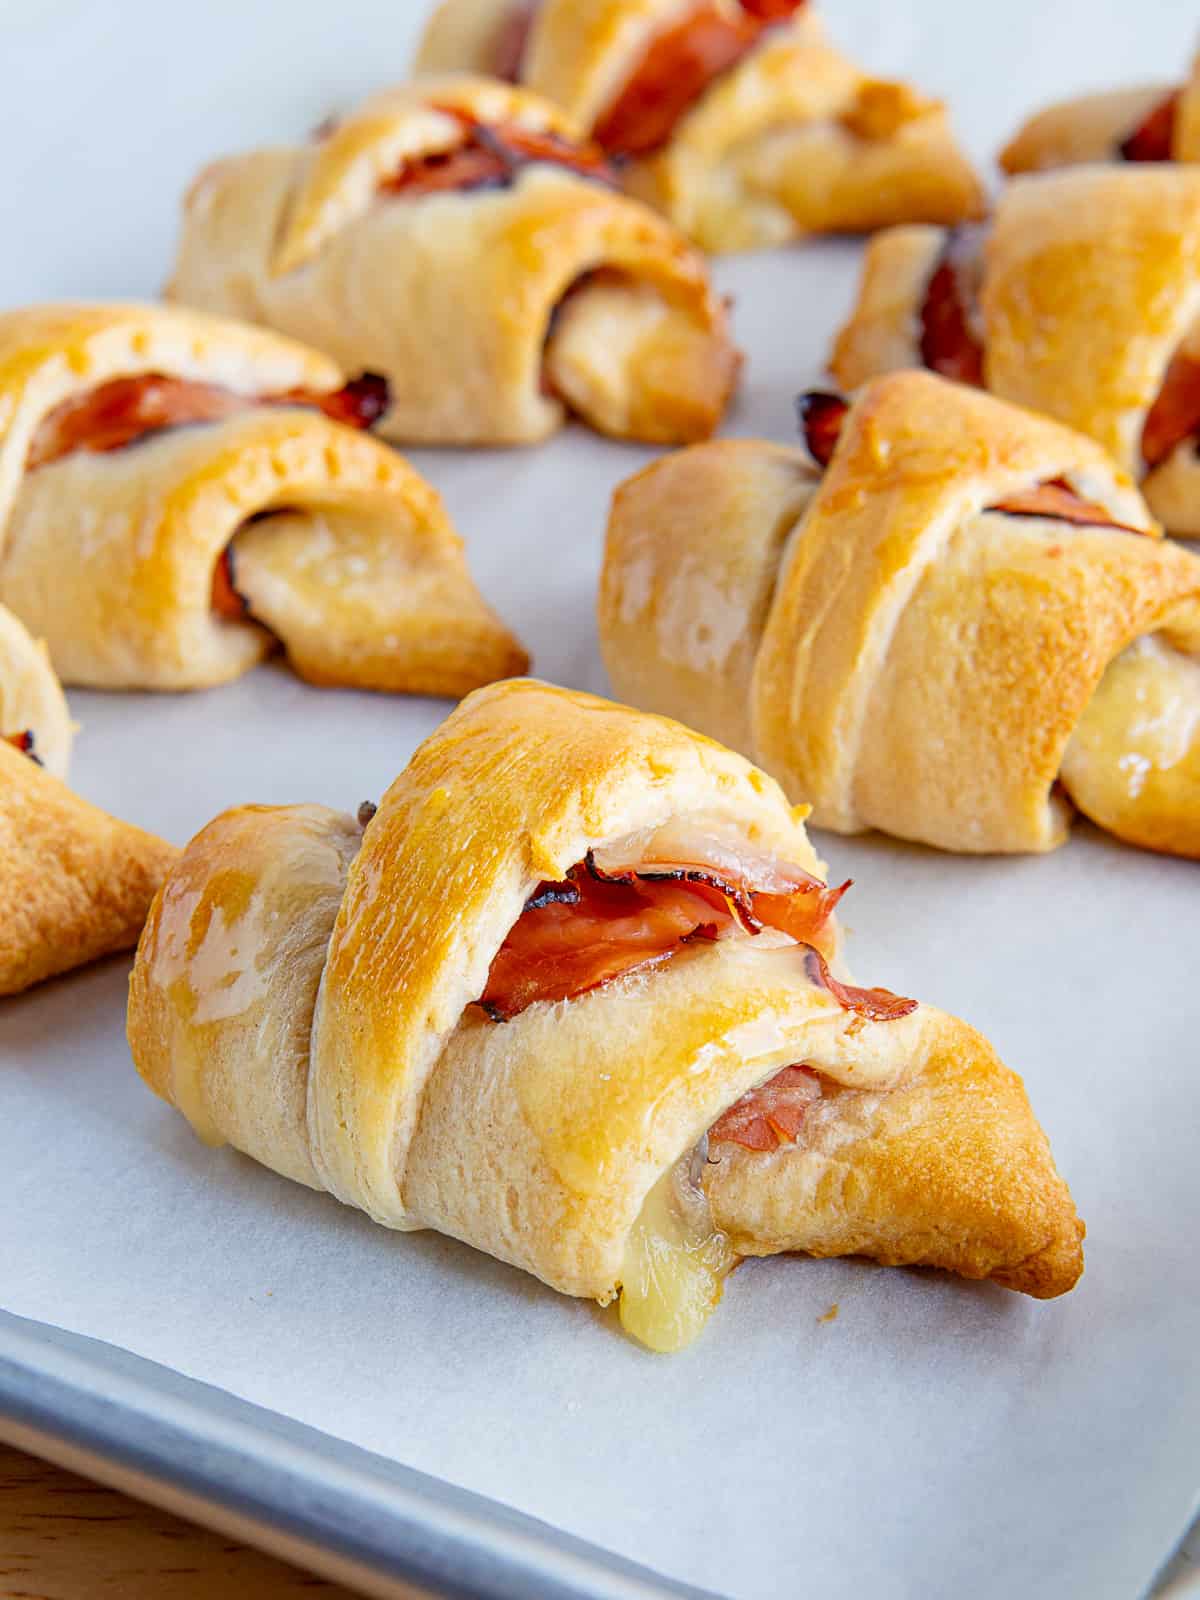 Ham and cheese crescent rolls cooling on a baking sheet.